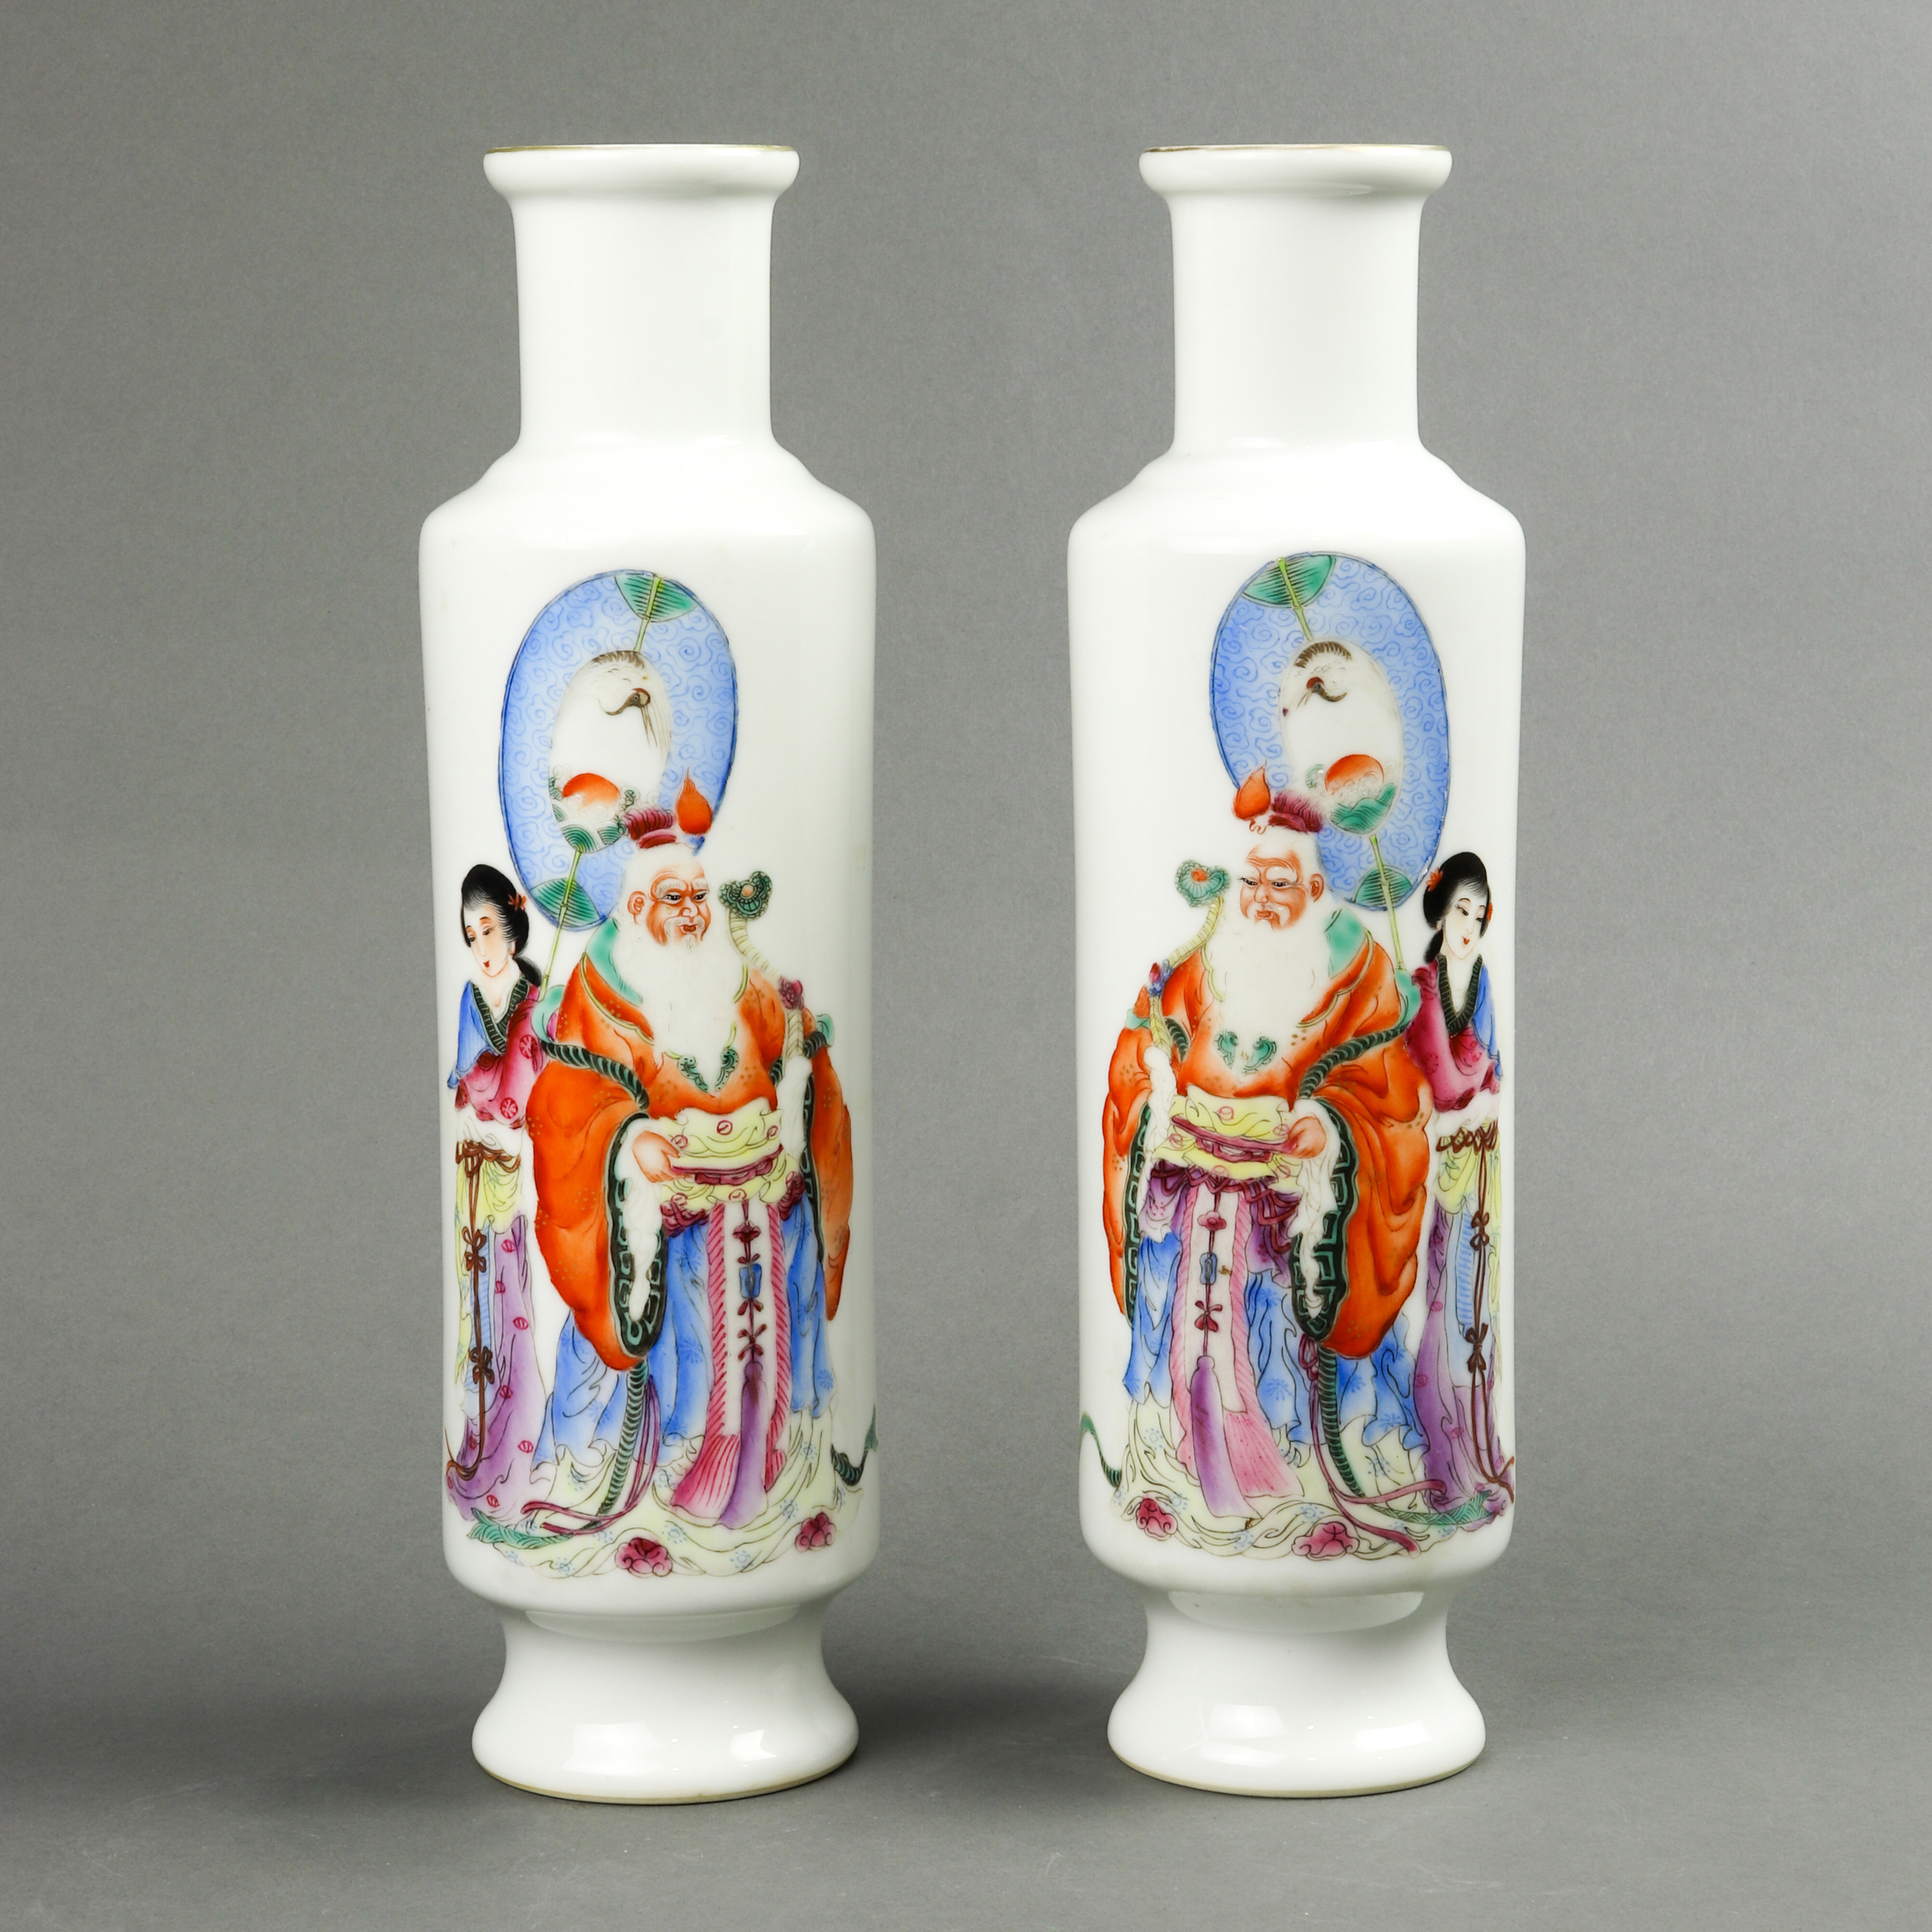 PAIR OF CHINESE FAMILLE ROSE VASES 3a4dbc